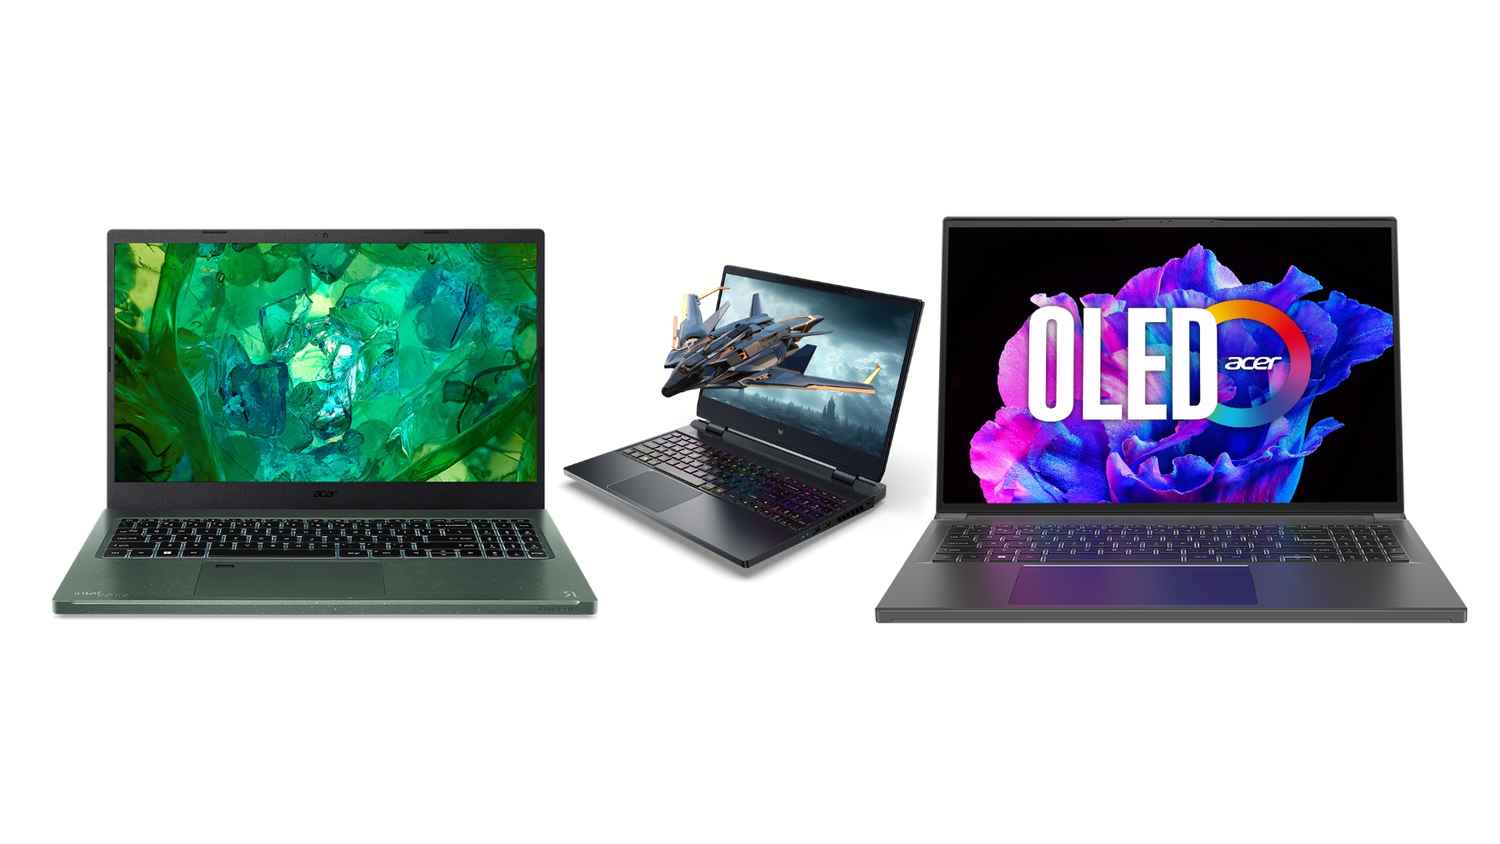 Acer launches 6 new consumer laptops and a lot more at its global press conference